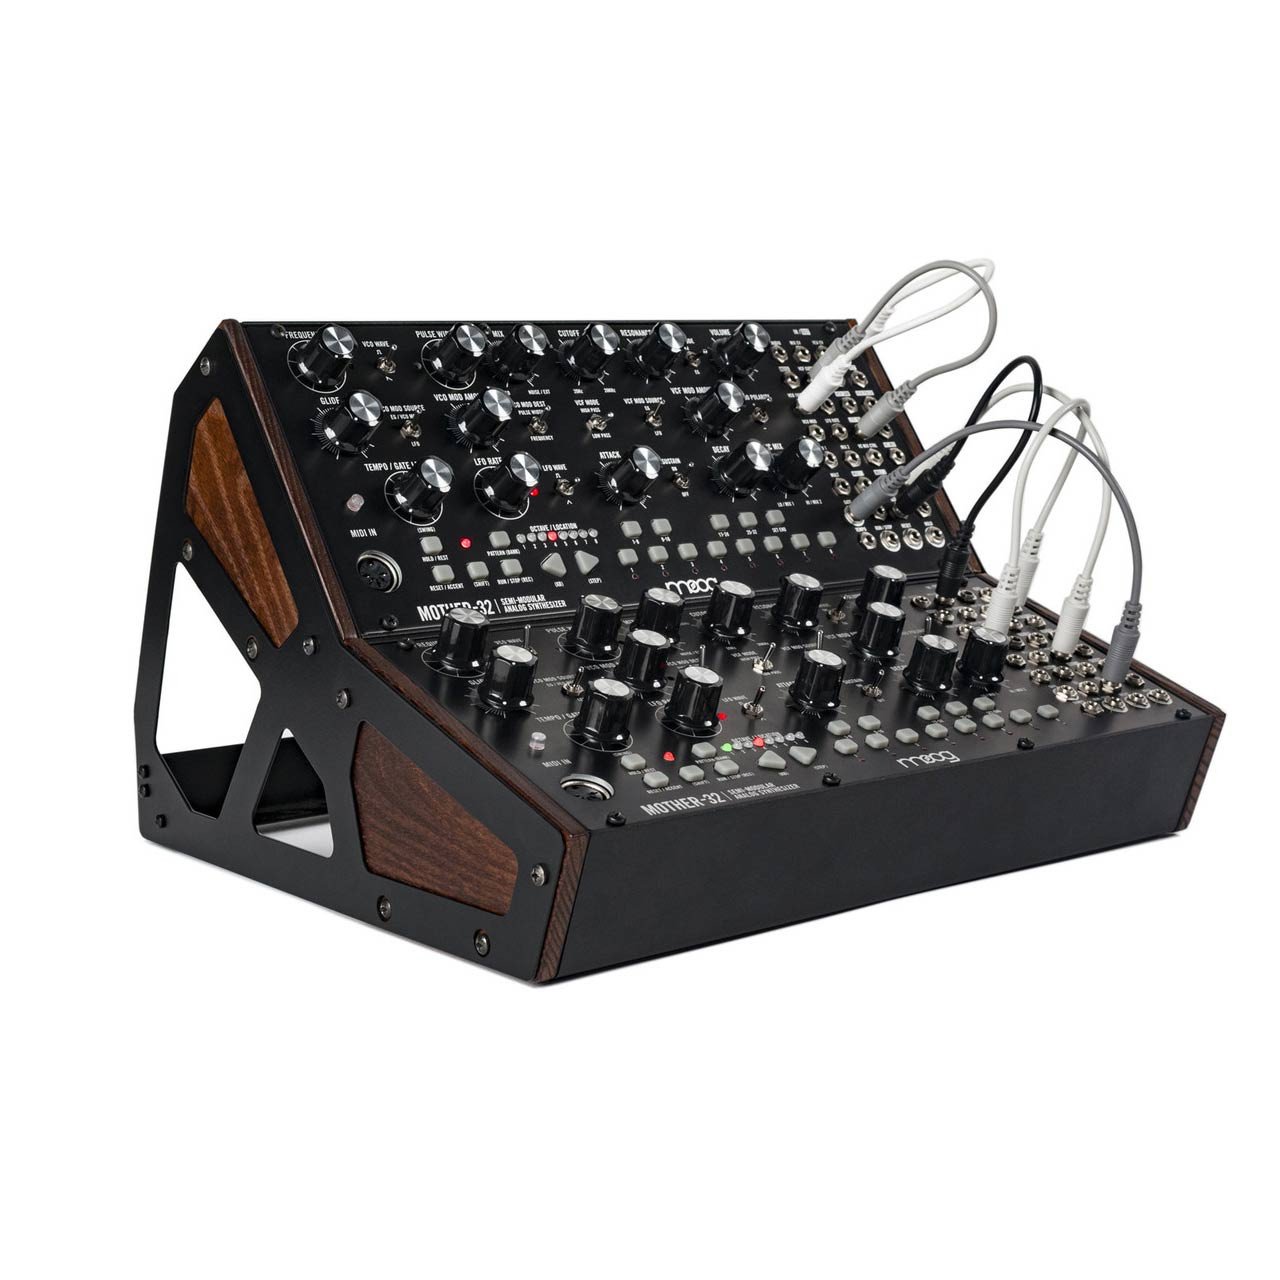 Desktop Synthesizers - Moog Mother 32 Two Tier Rack Kit